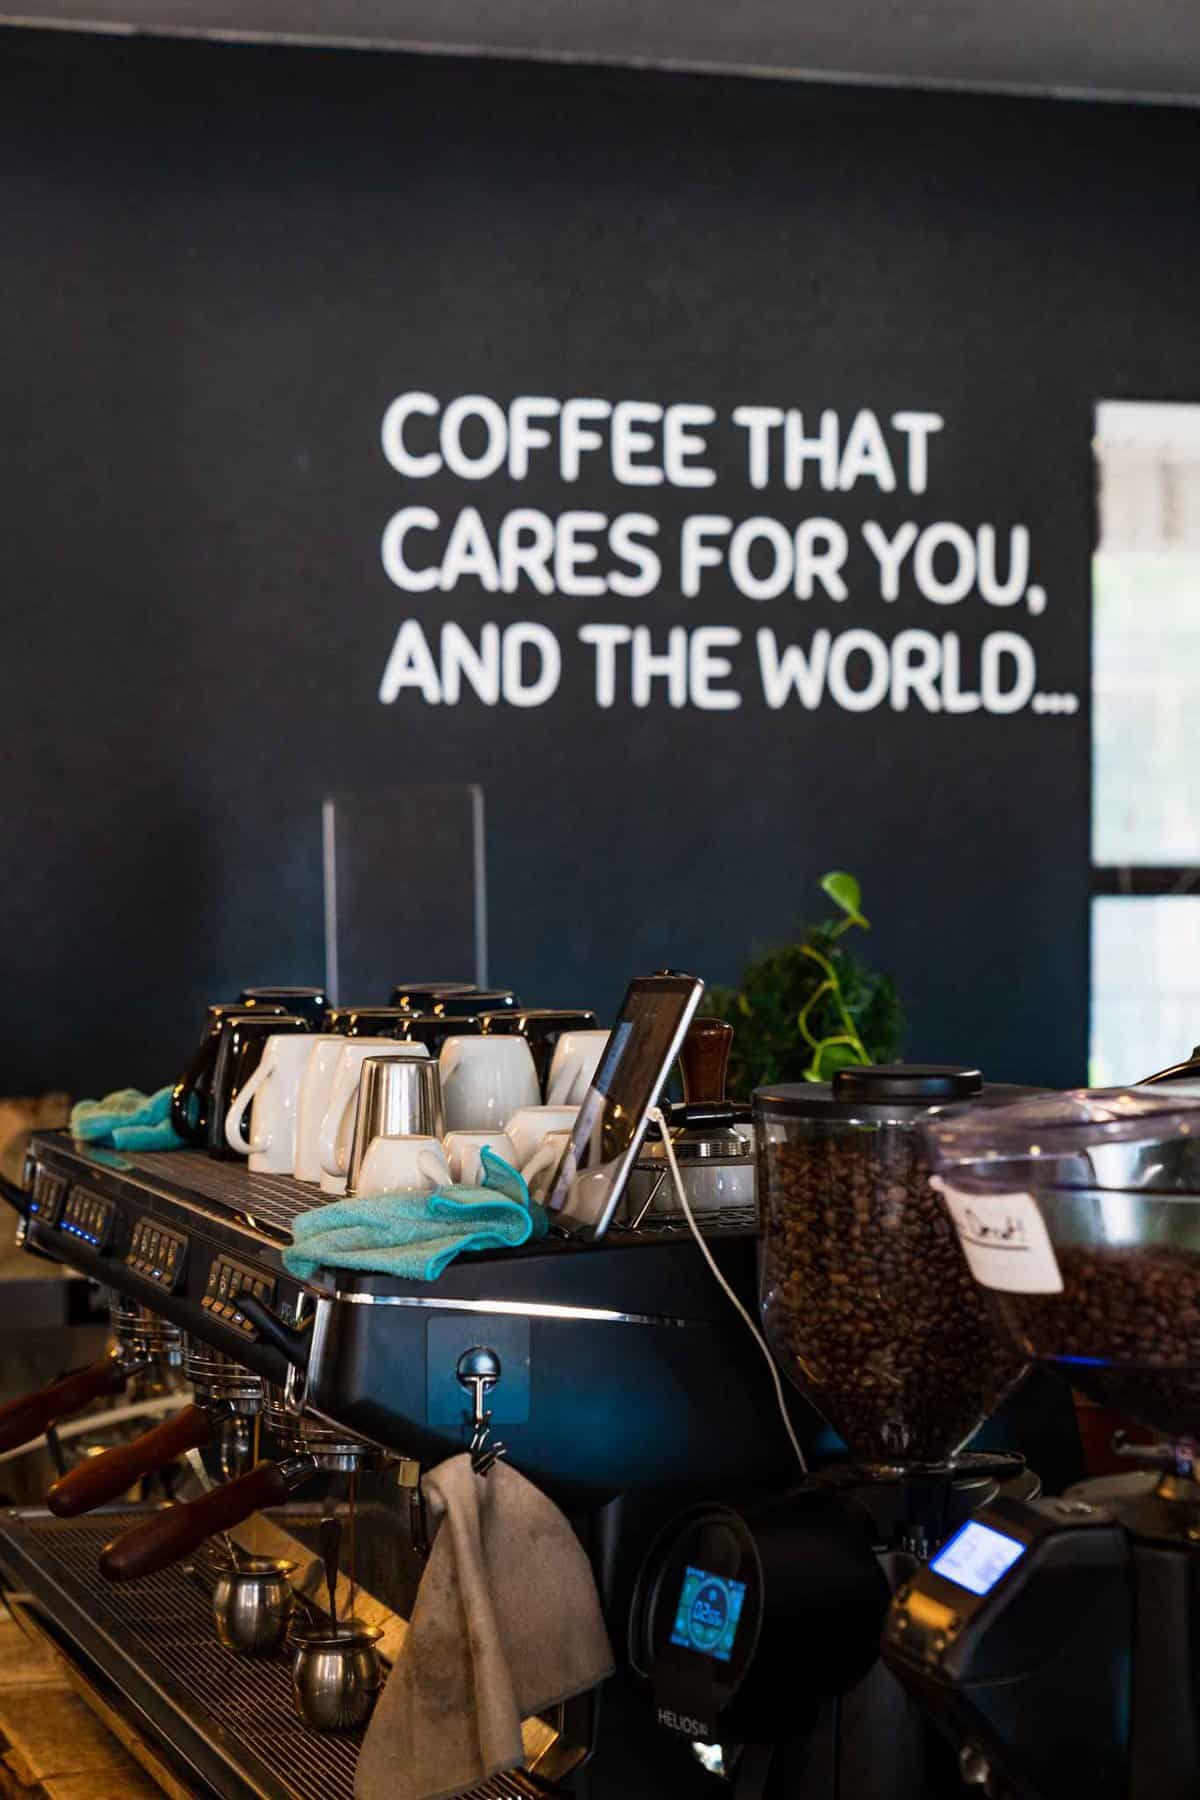 "COFFEE THAT CARES FOR YOU AND THE WORLD" Sign with Coffee Machine on background